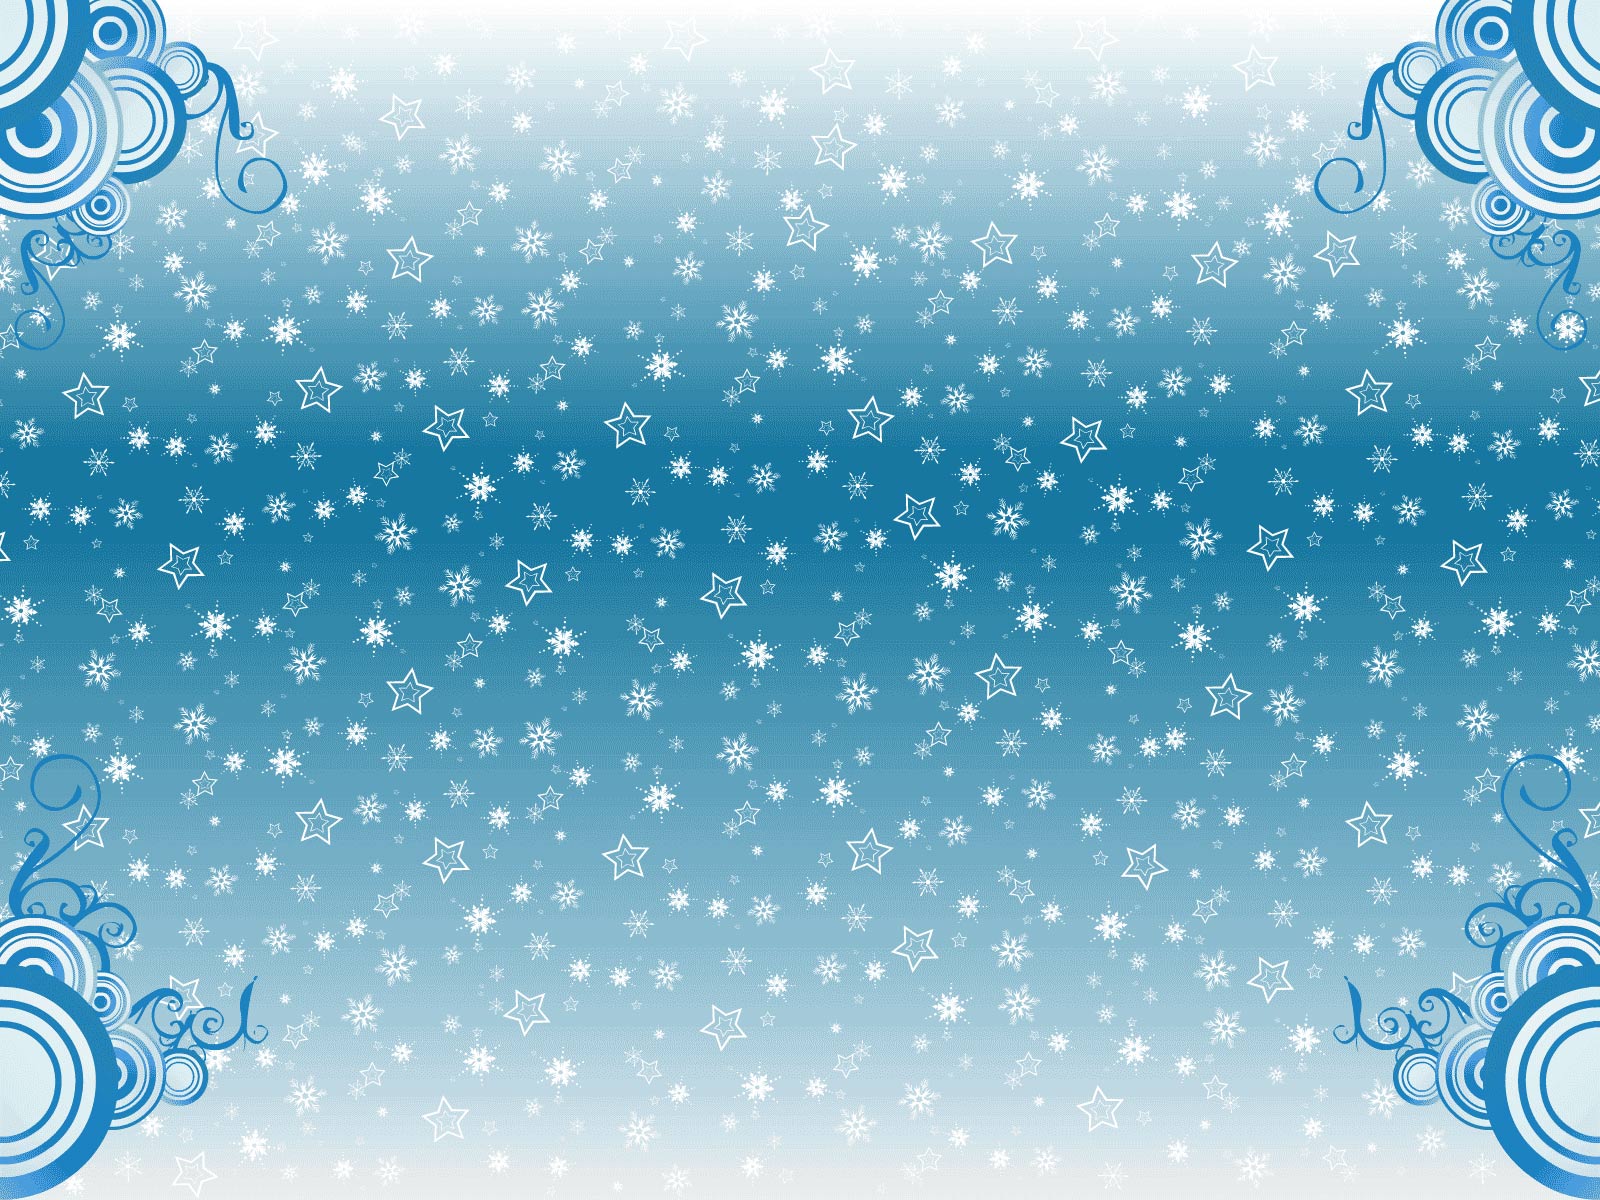 free winter clip art backgrounds - photo #14